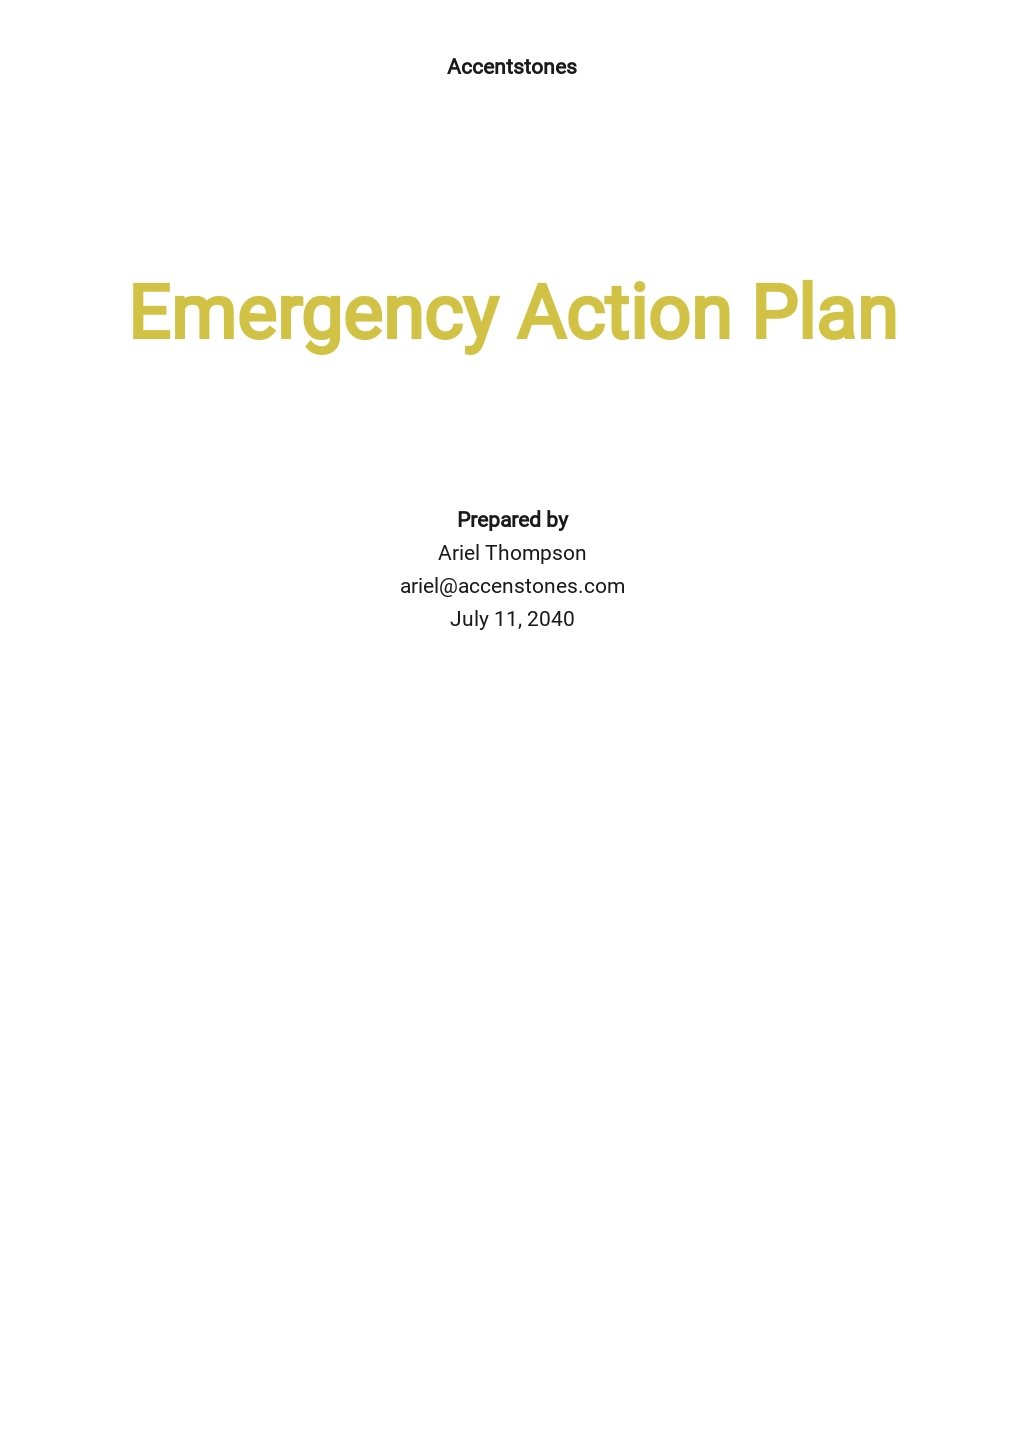 Free Emergency Action Plan Templates, 12+ Download in PDF, Word, Pages